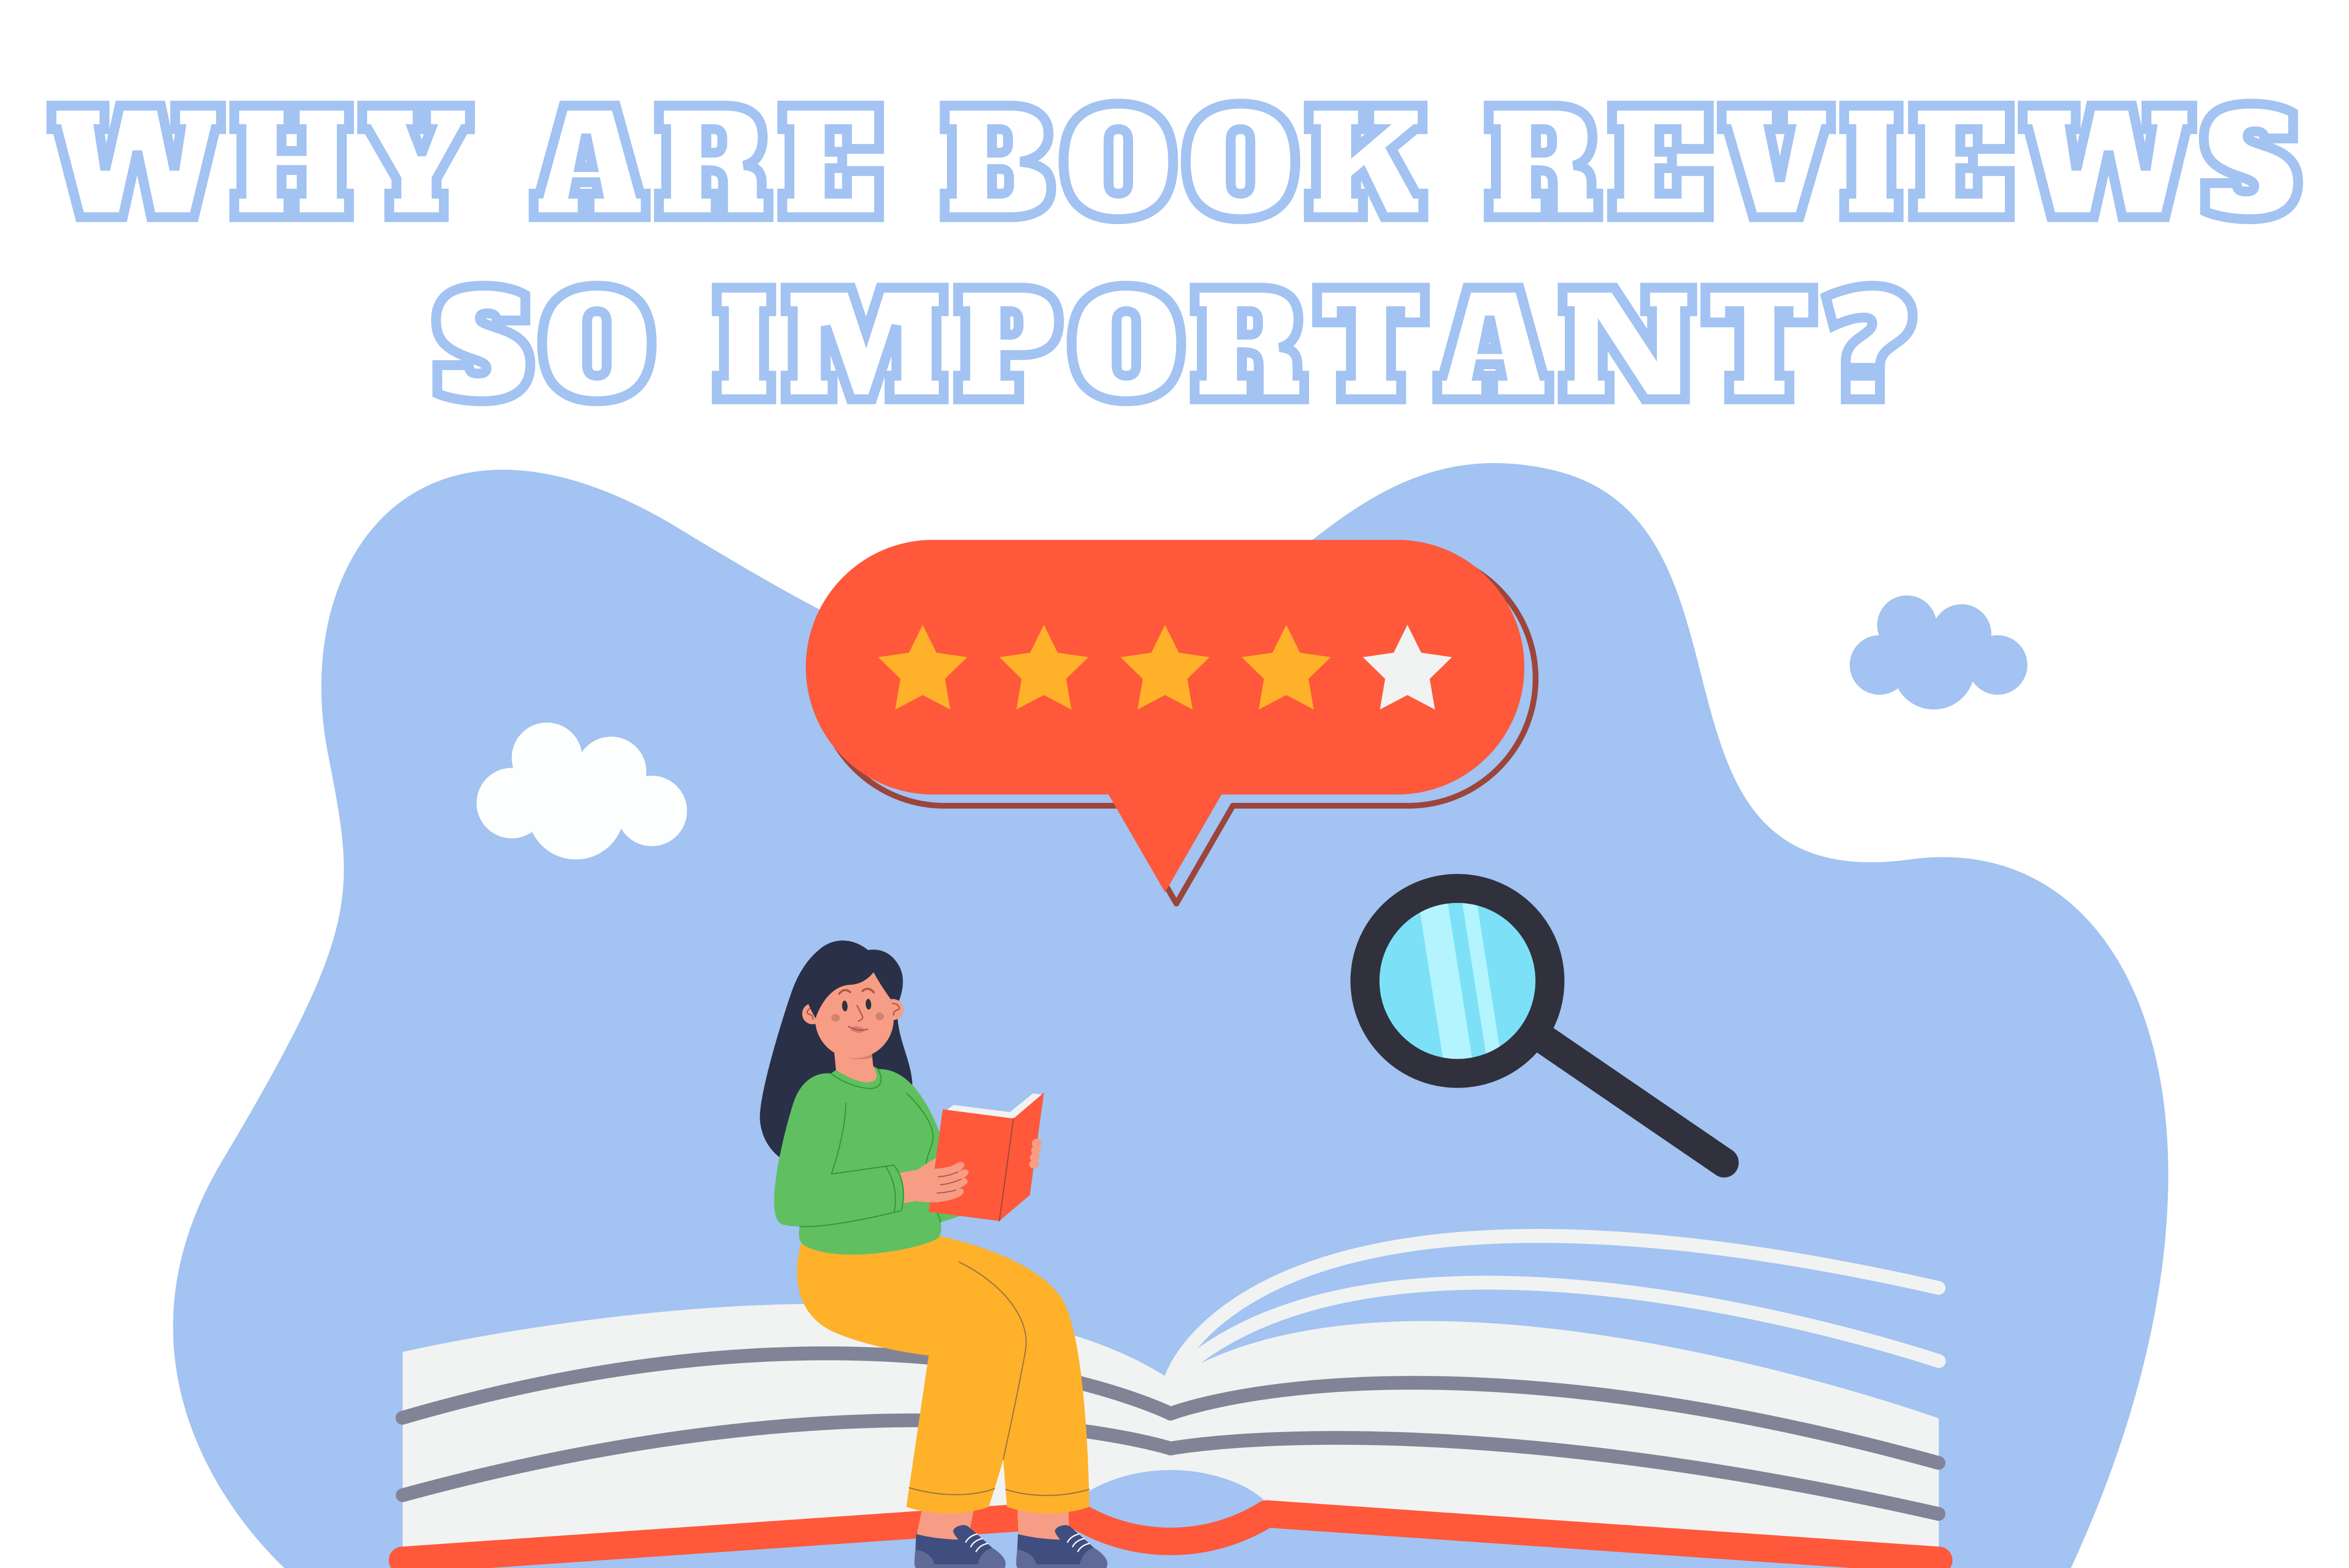 Why are book reviews so important